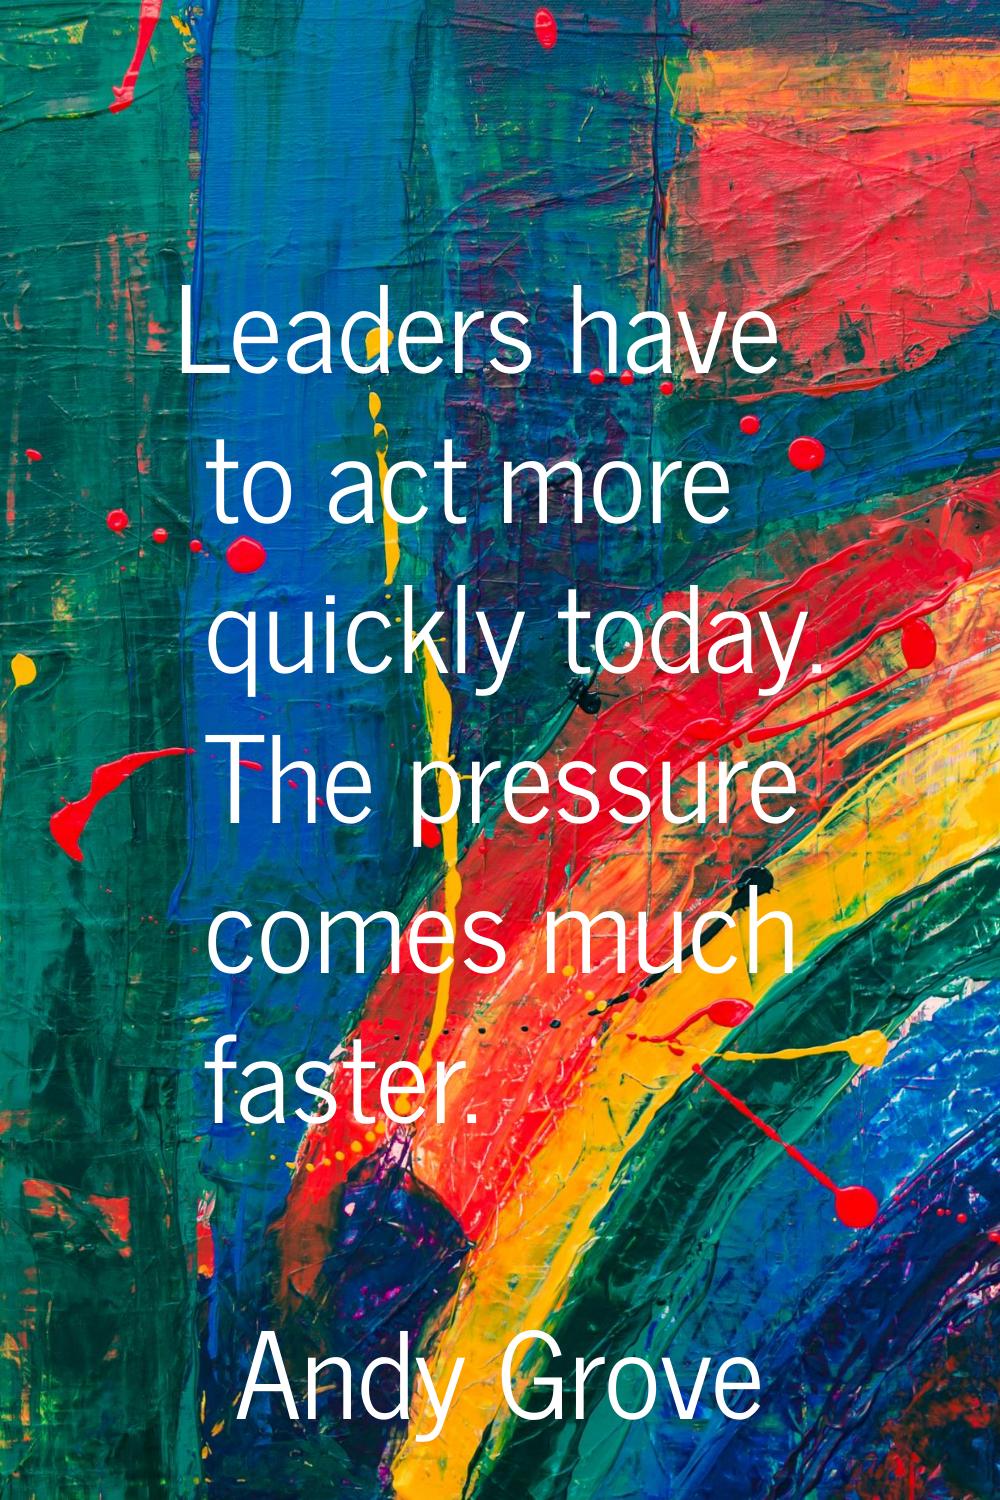 Leaders have to act more quickly today. The pressure comes much faster.